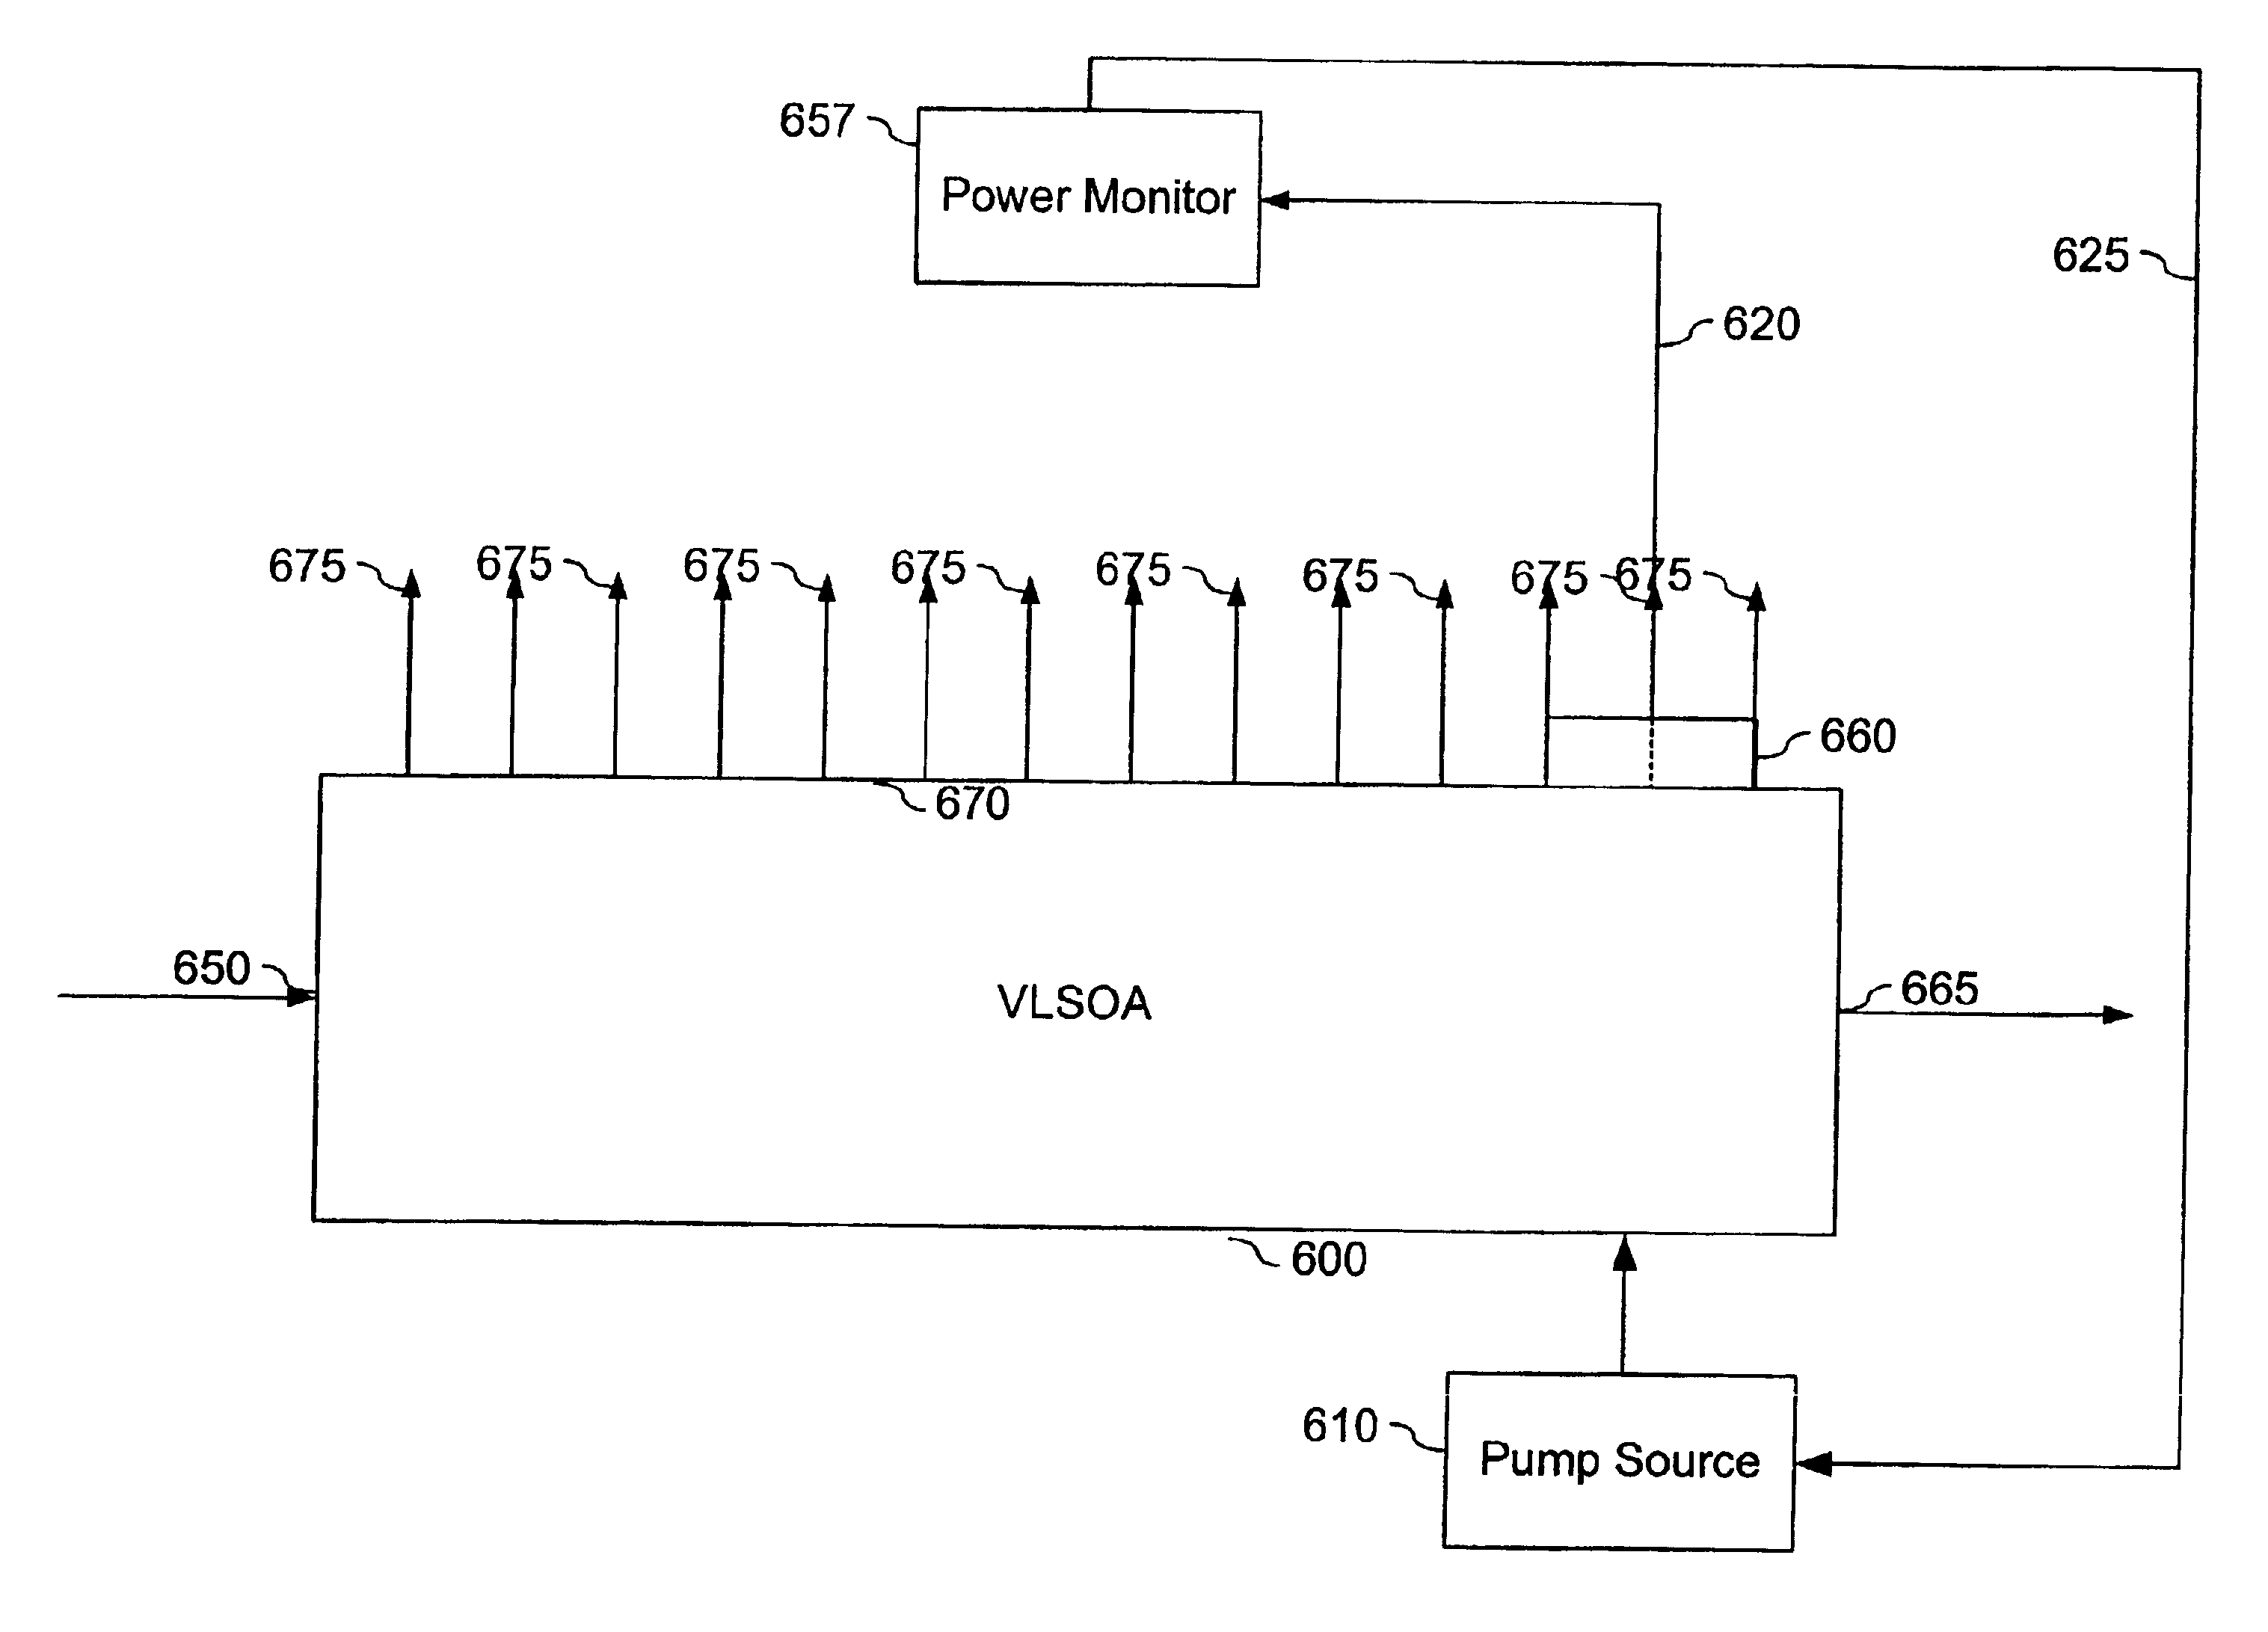 Lasing semiconductor optical amplifier with output power monitor and control